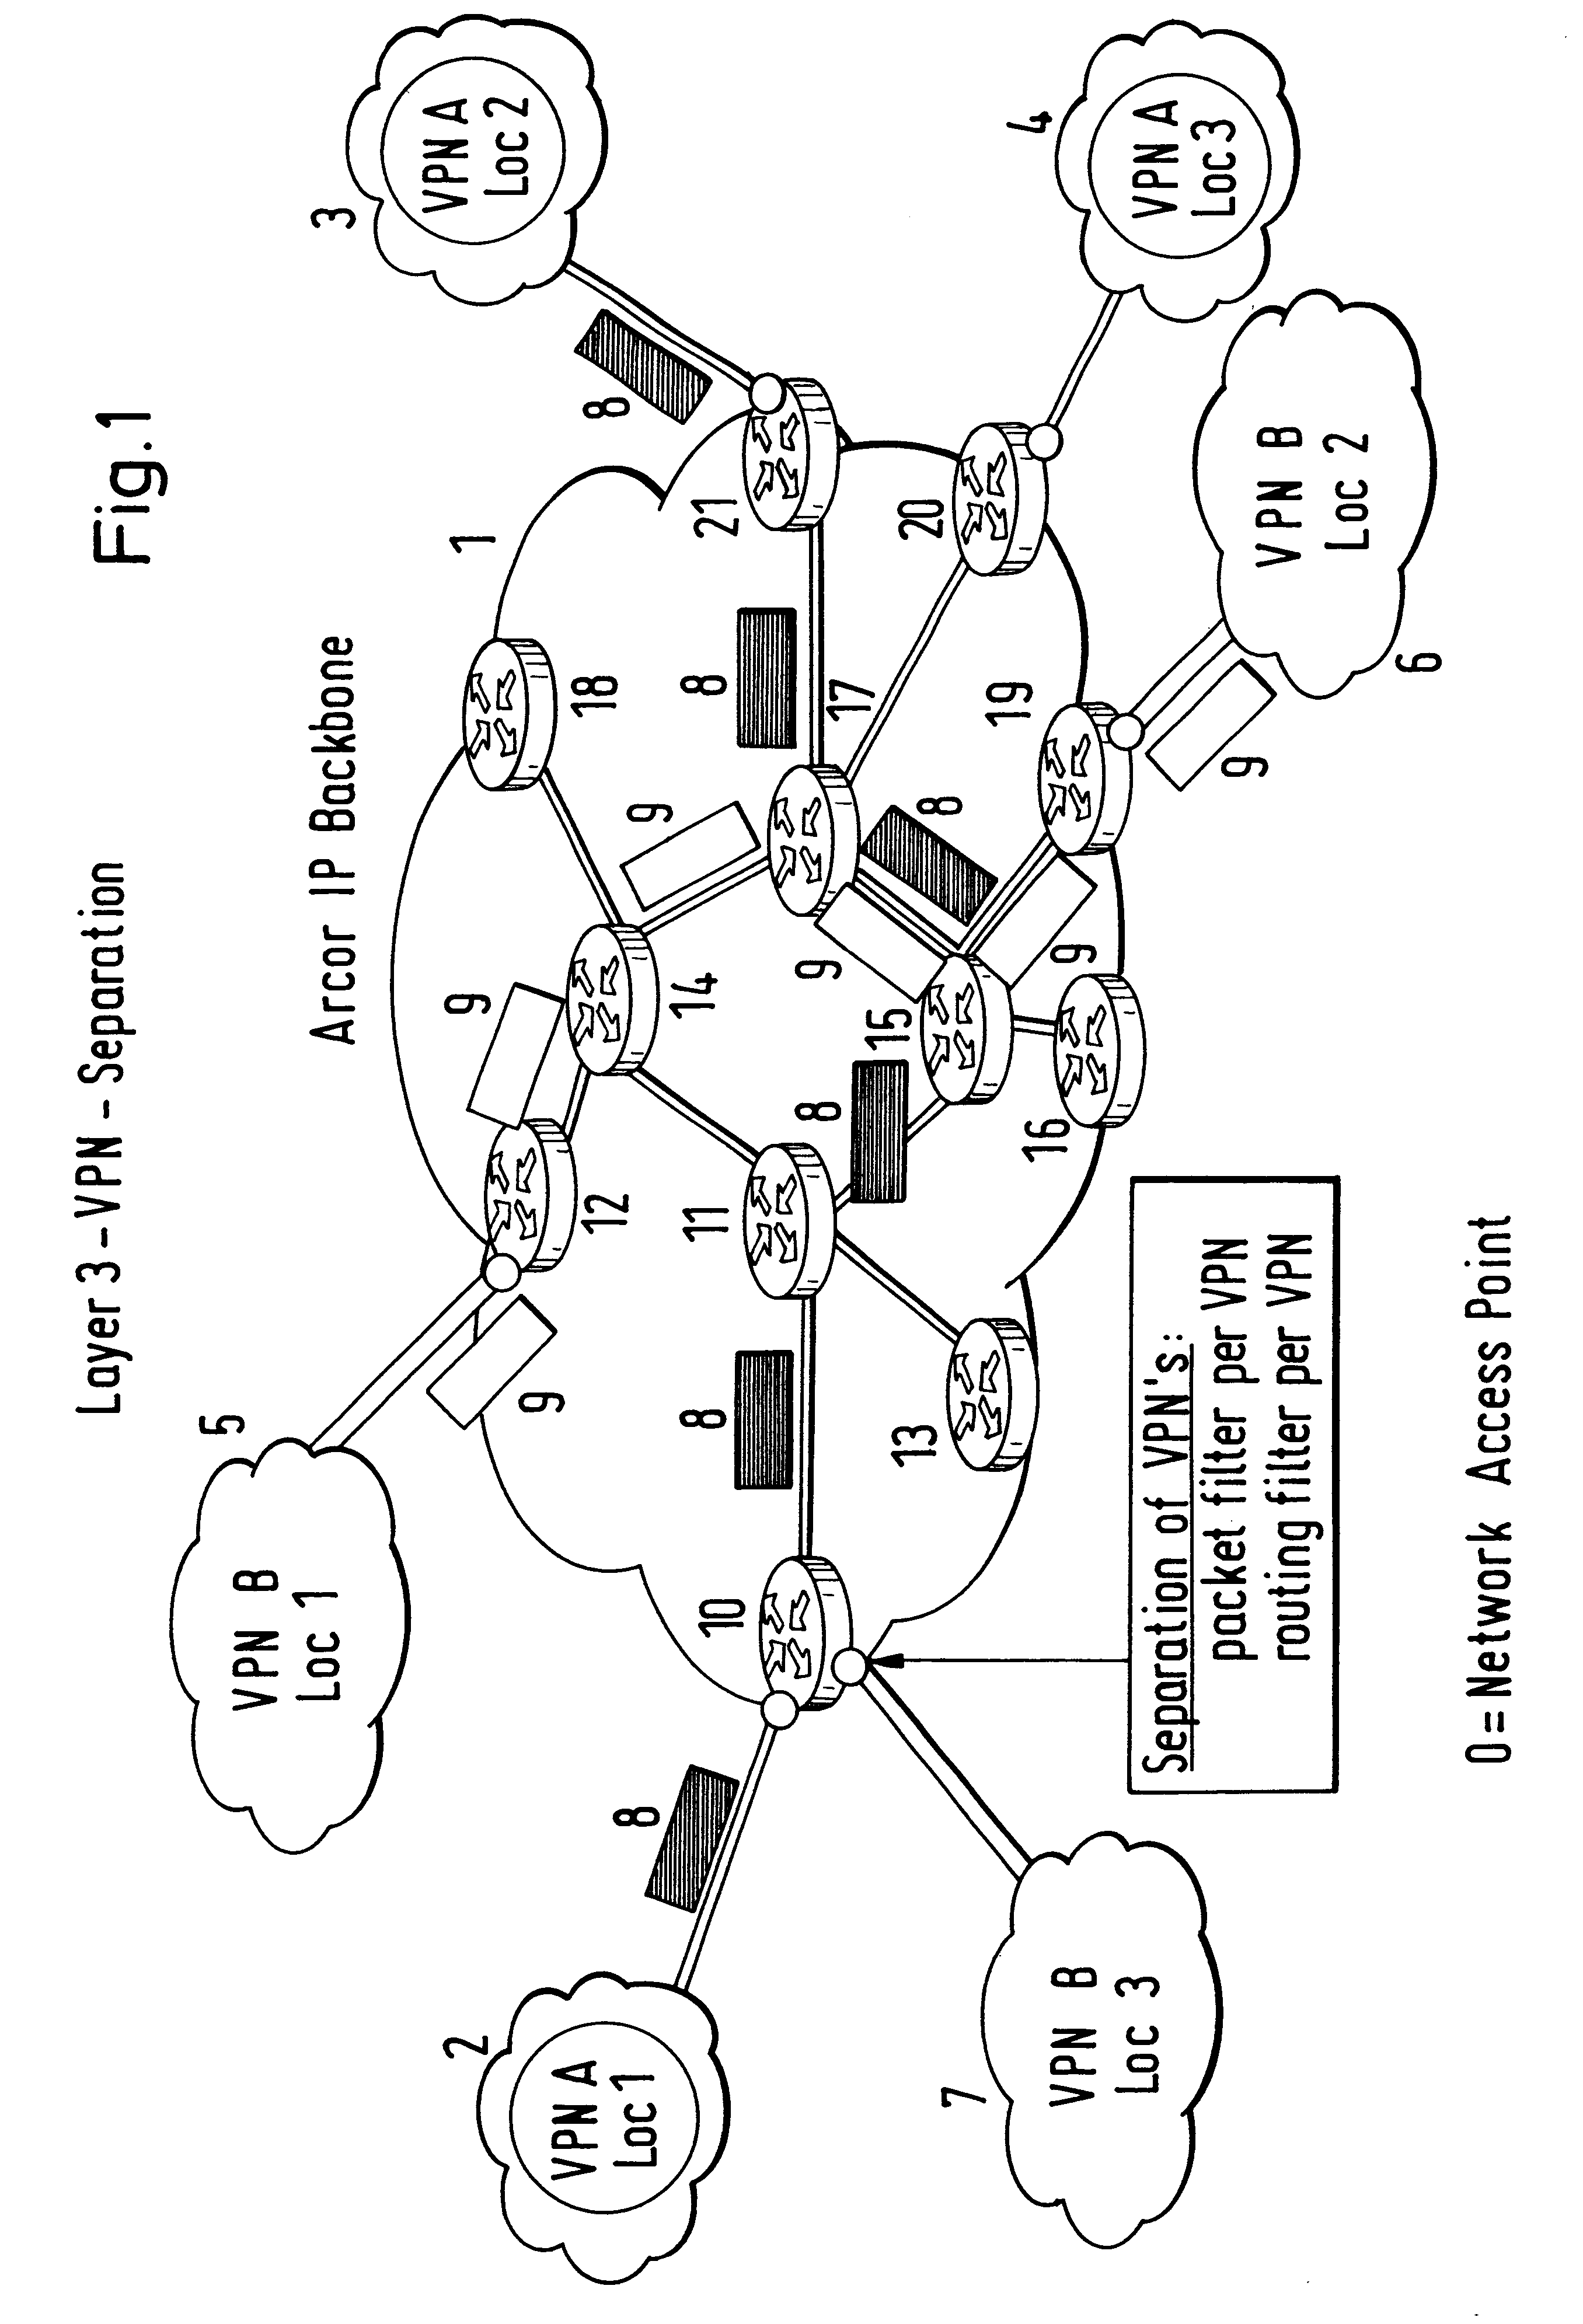 Process and apparatus for the operation of virtual private networks on a common data packet communication network